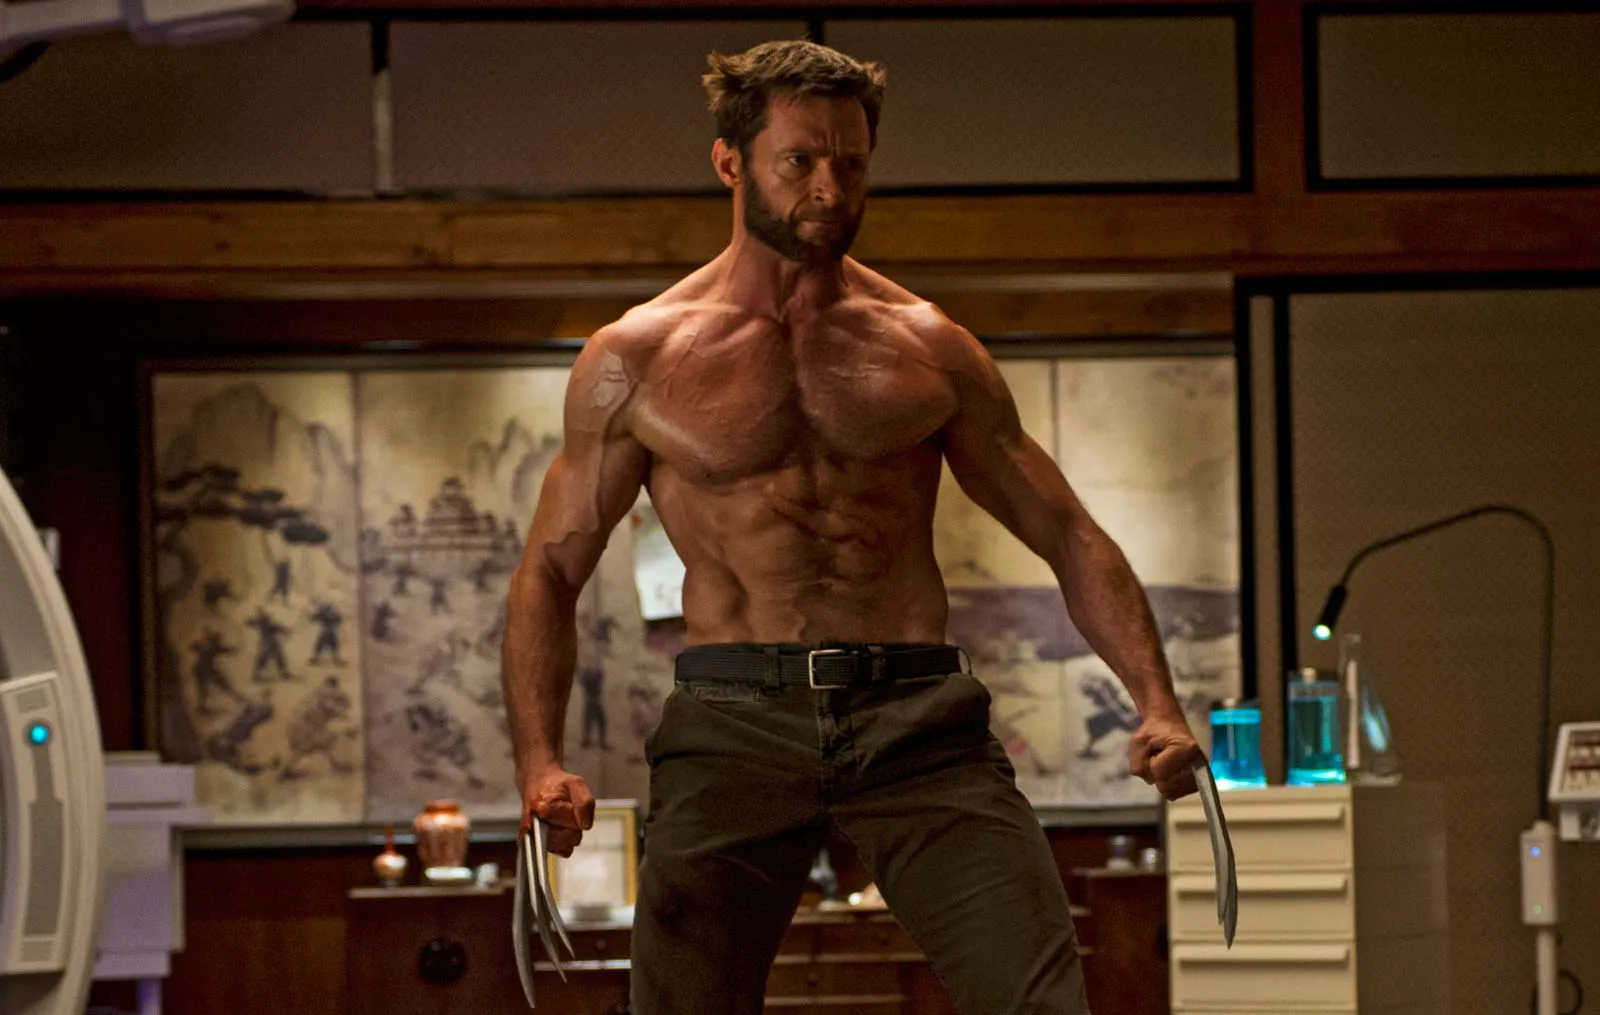 Which film featured Hugh Jackman as a hacker who is forced to help steal billions of dollars?